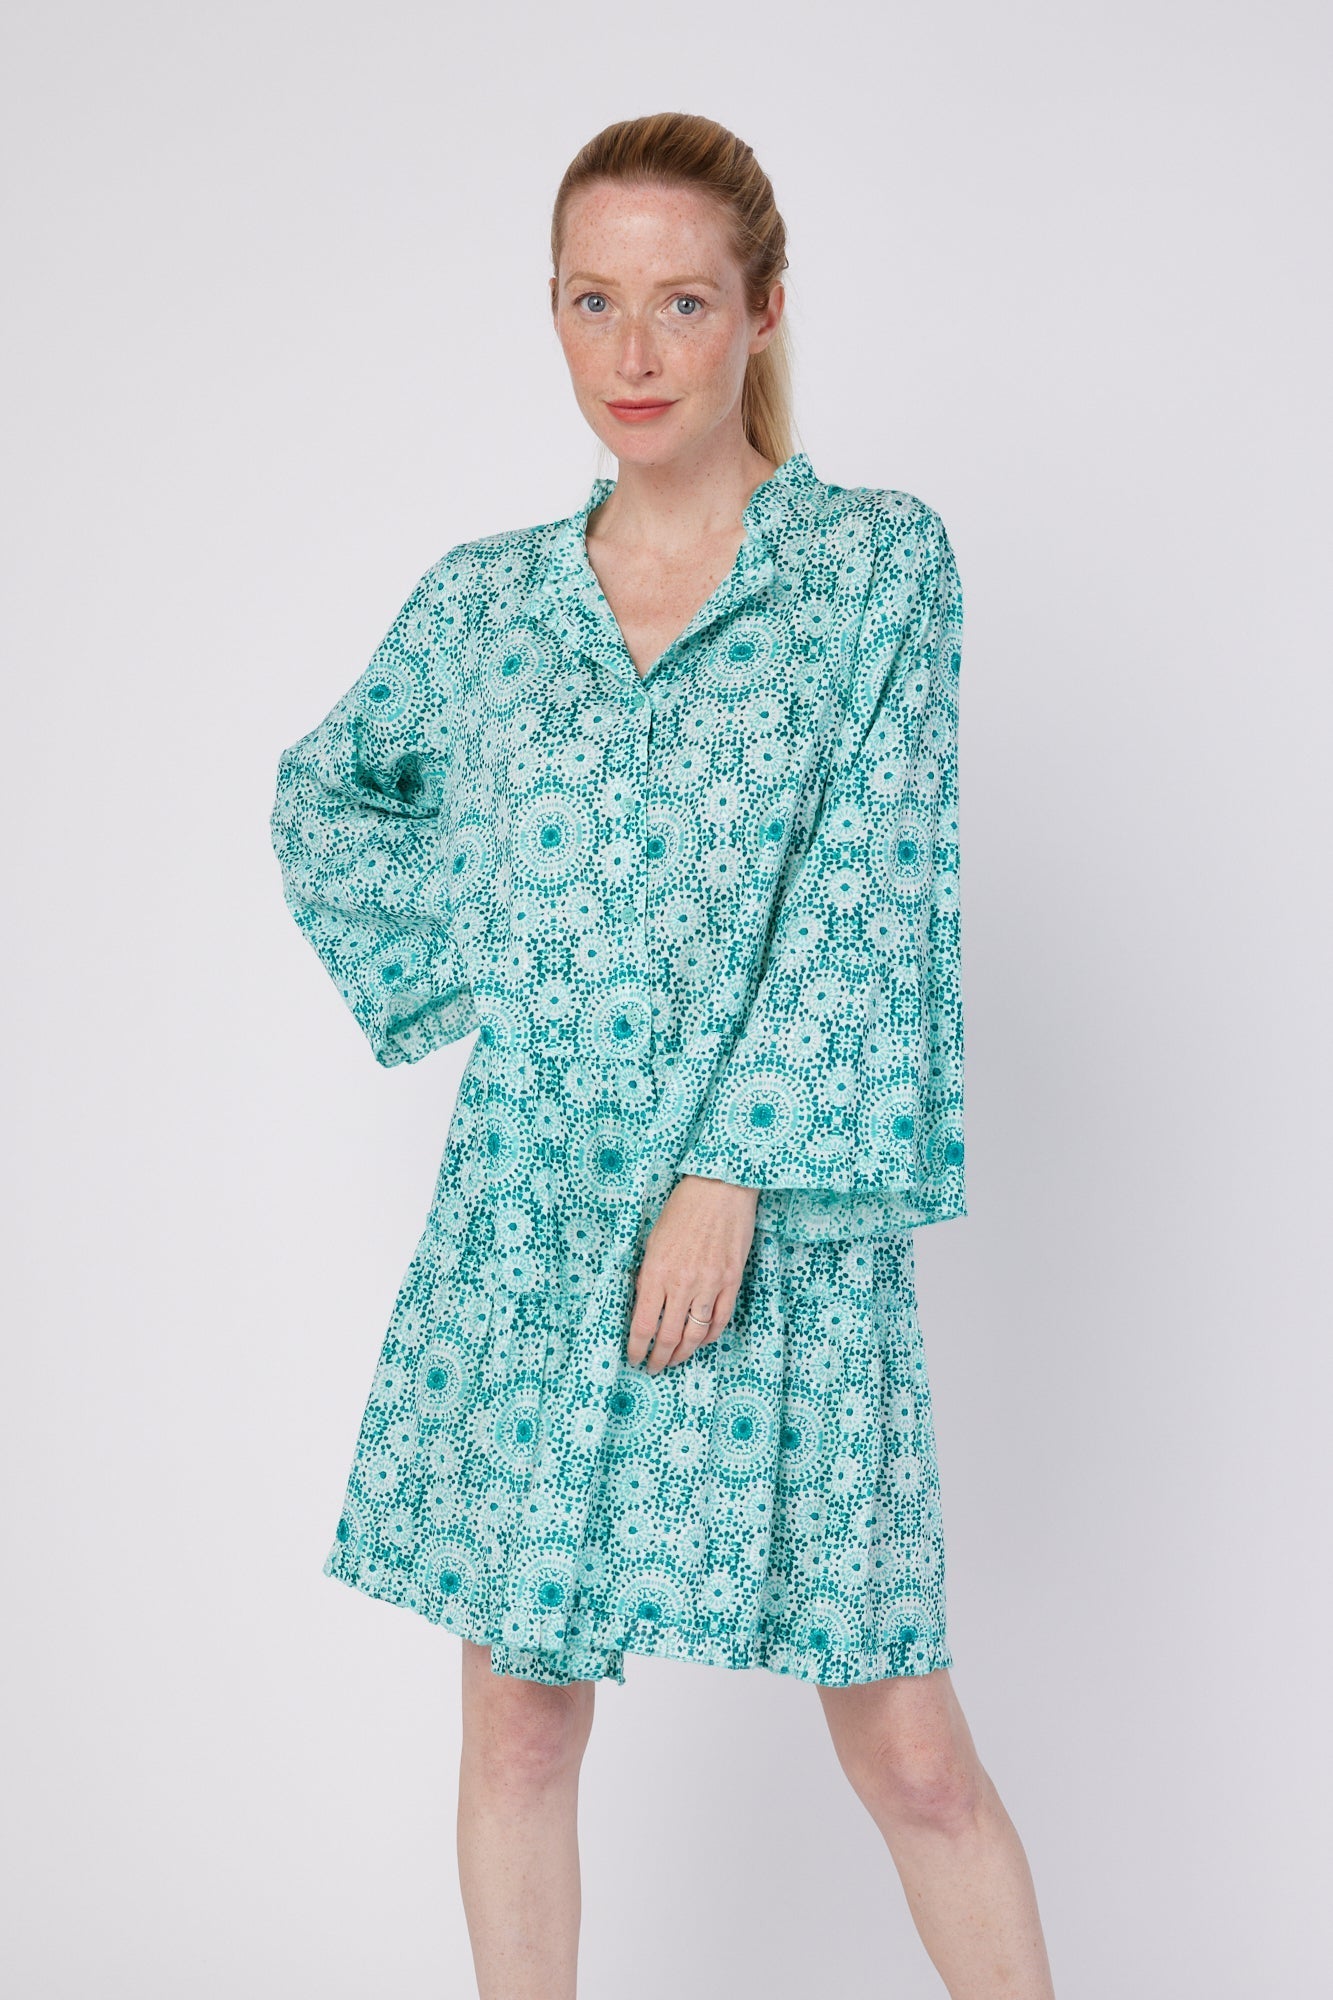 ModaPosa Alcee 3/4 Frill Sleeve Ruffle Knee Length Relaxed Dress in Moroccan Tile . Discover women's resort dresses and lifestyle clothing inspired by the Mediterranean. Free worldwide shipping available!